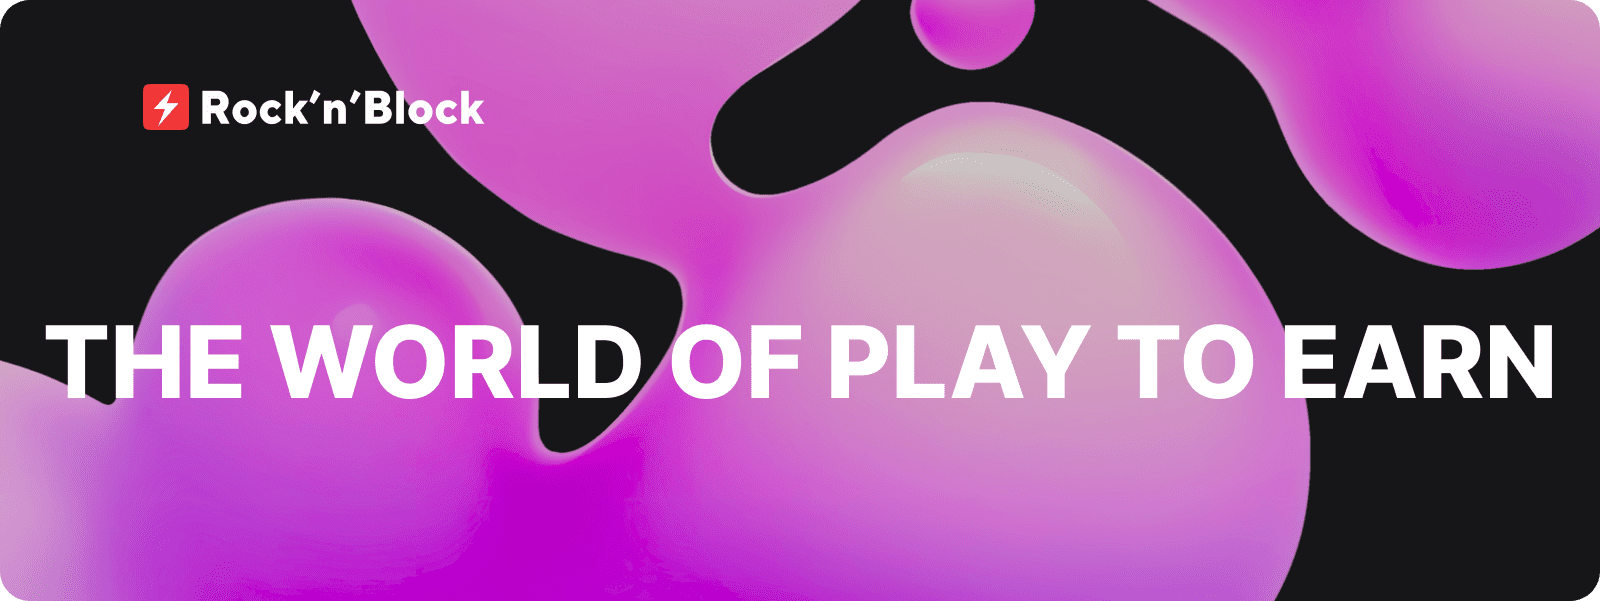 The World of Play to Earn